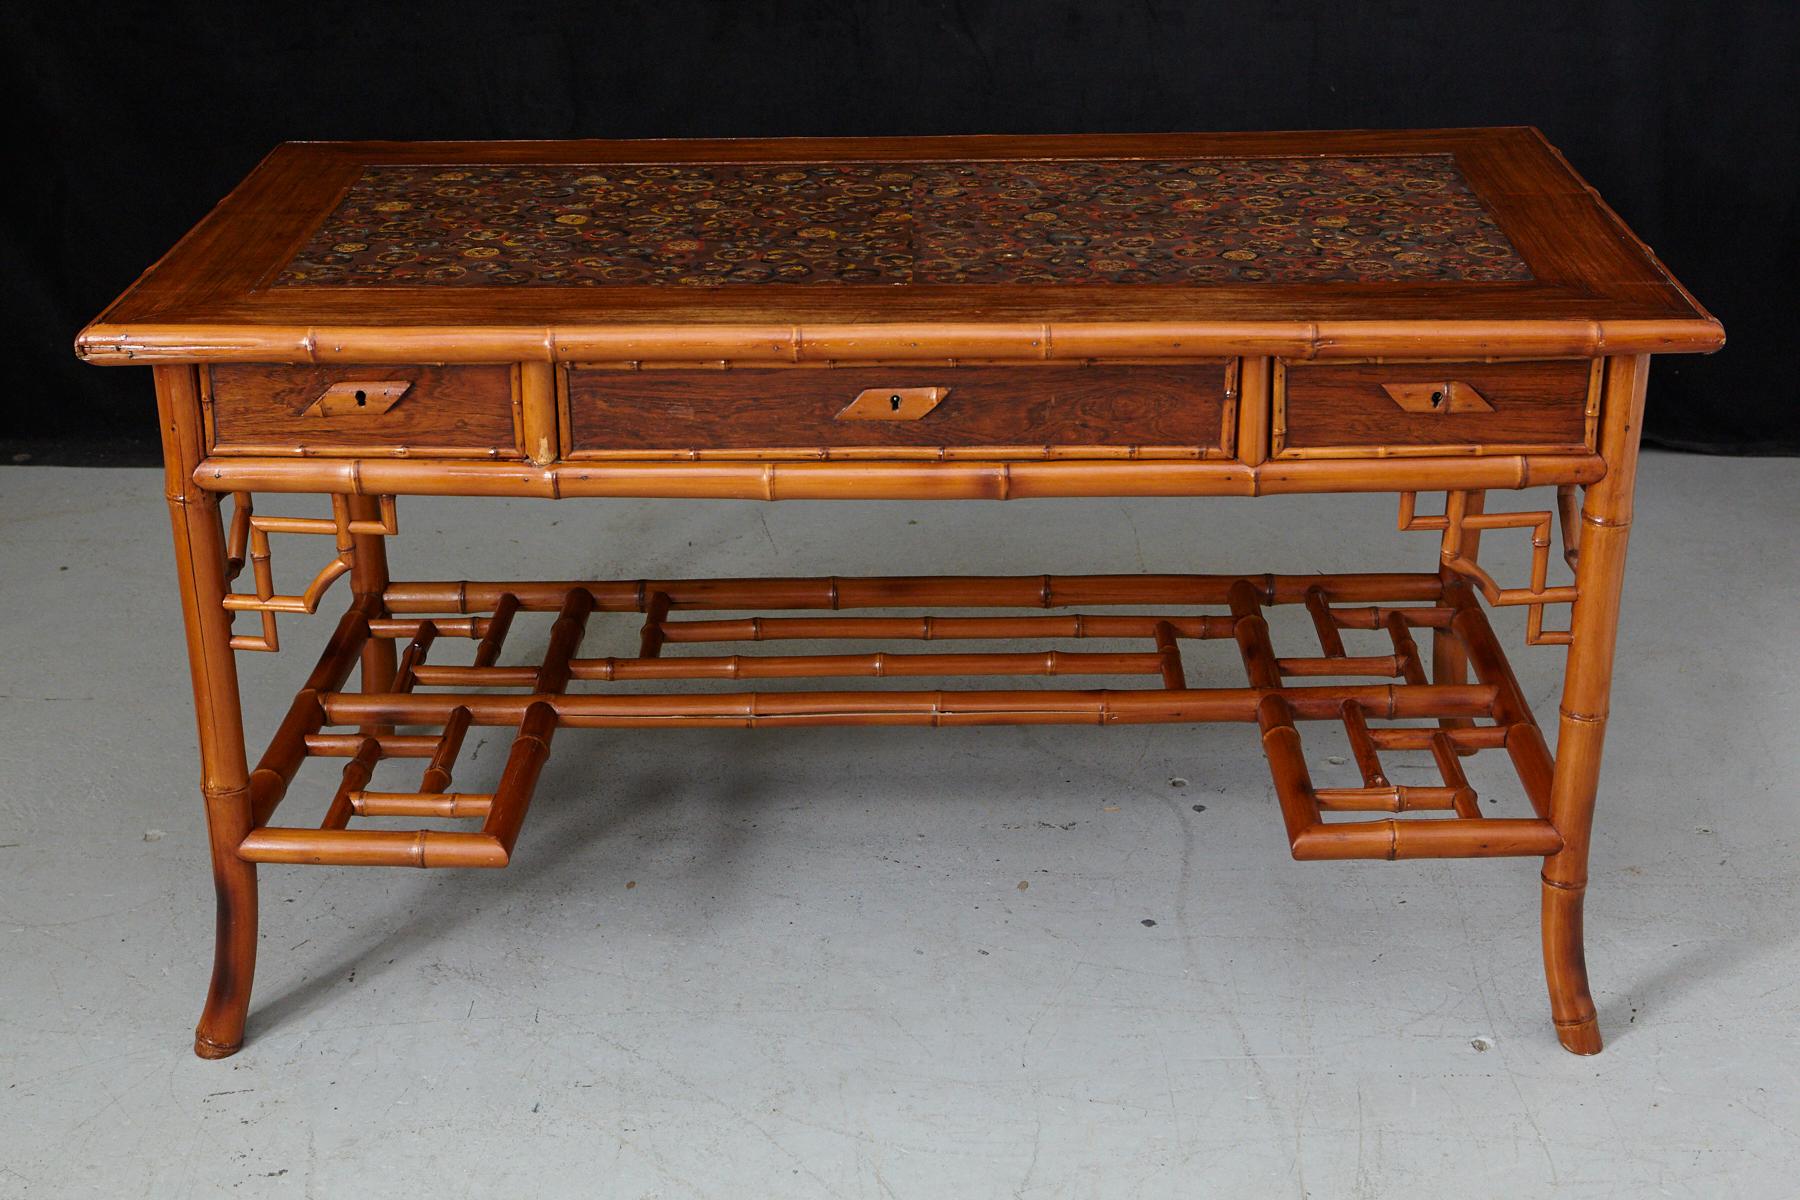 Lacquered Early 20th Century French Bamboo Desk with Drawers and Leather Top, circa 1920s